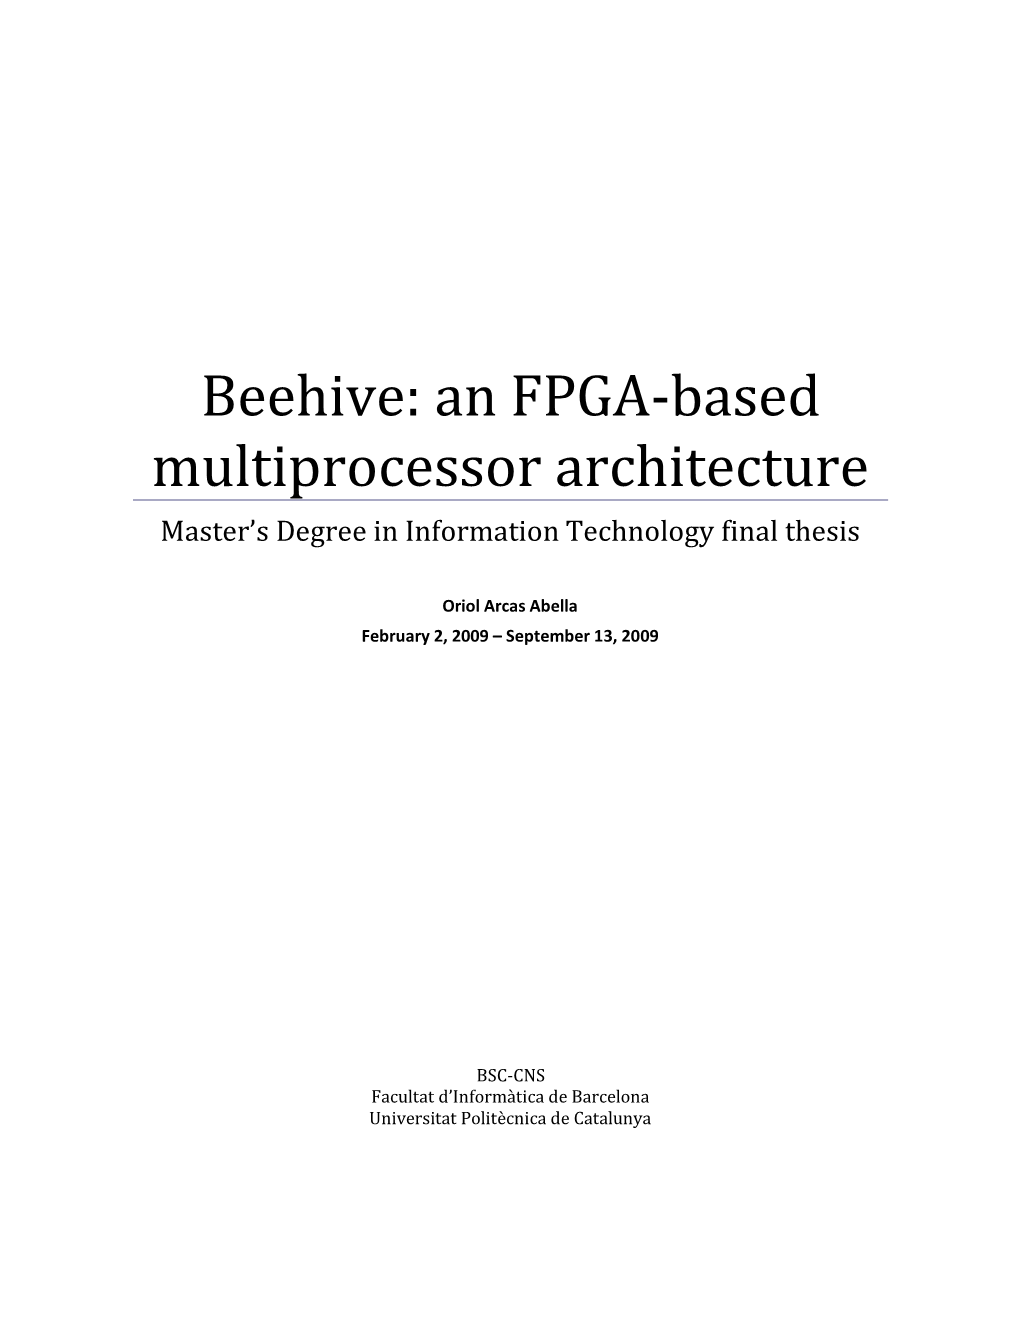 An FPGA-Based Multiprocessor Architecture Master’S Degree in Information Technology Final Thesis